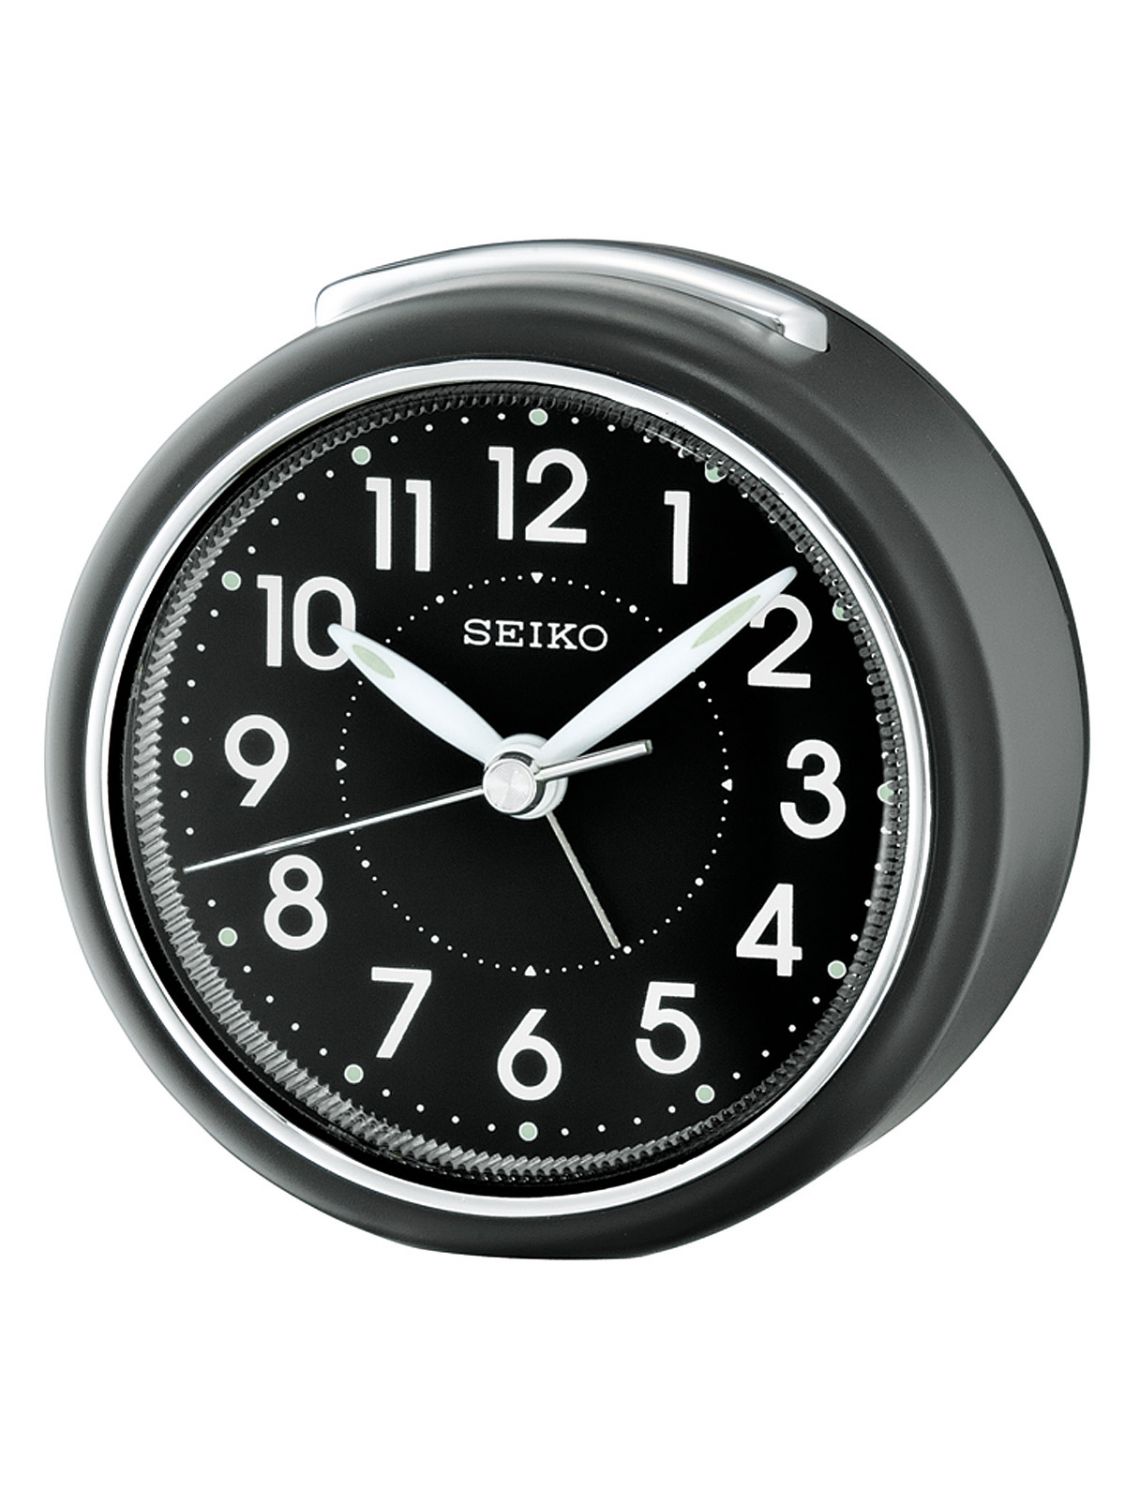 Casio Seiko Black Sweep Second Hand Bell Snooze Function Alarm Clock 